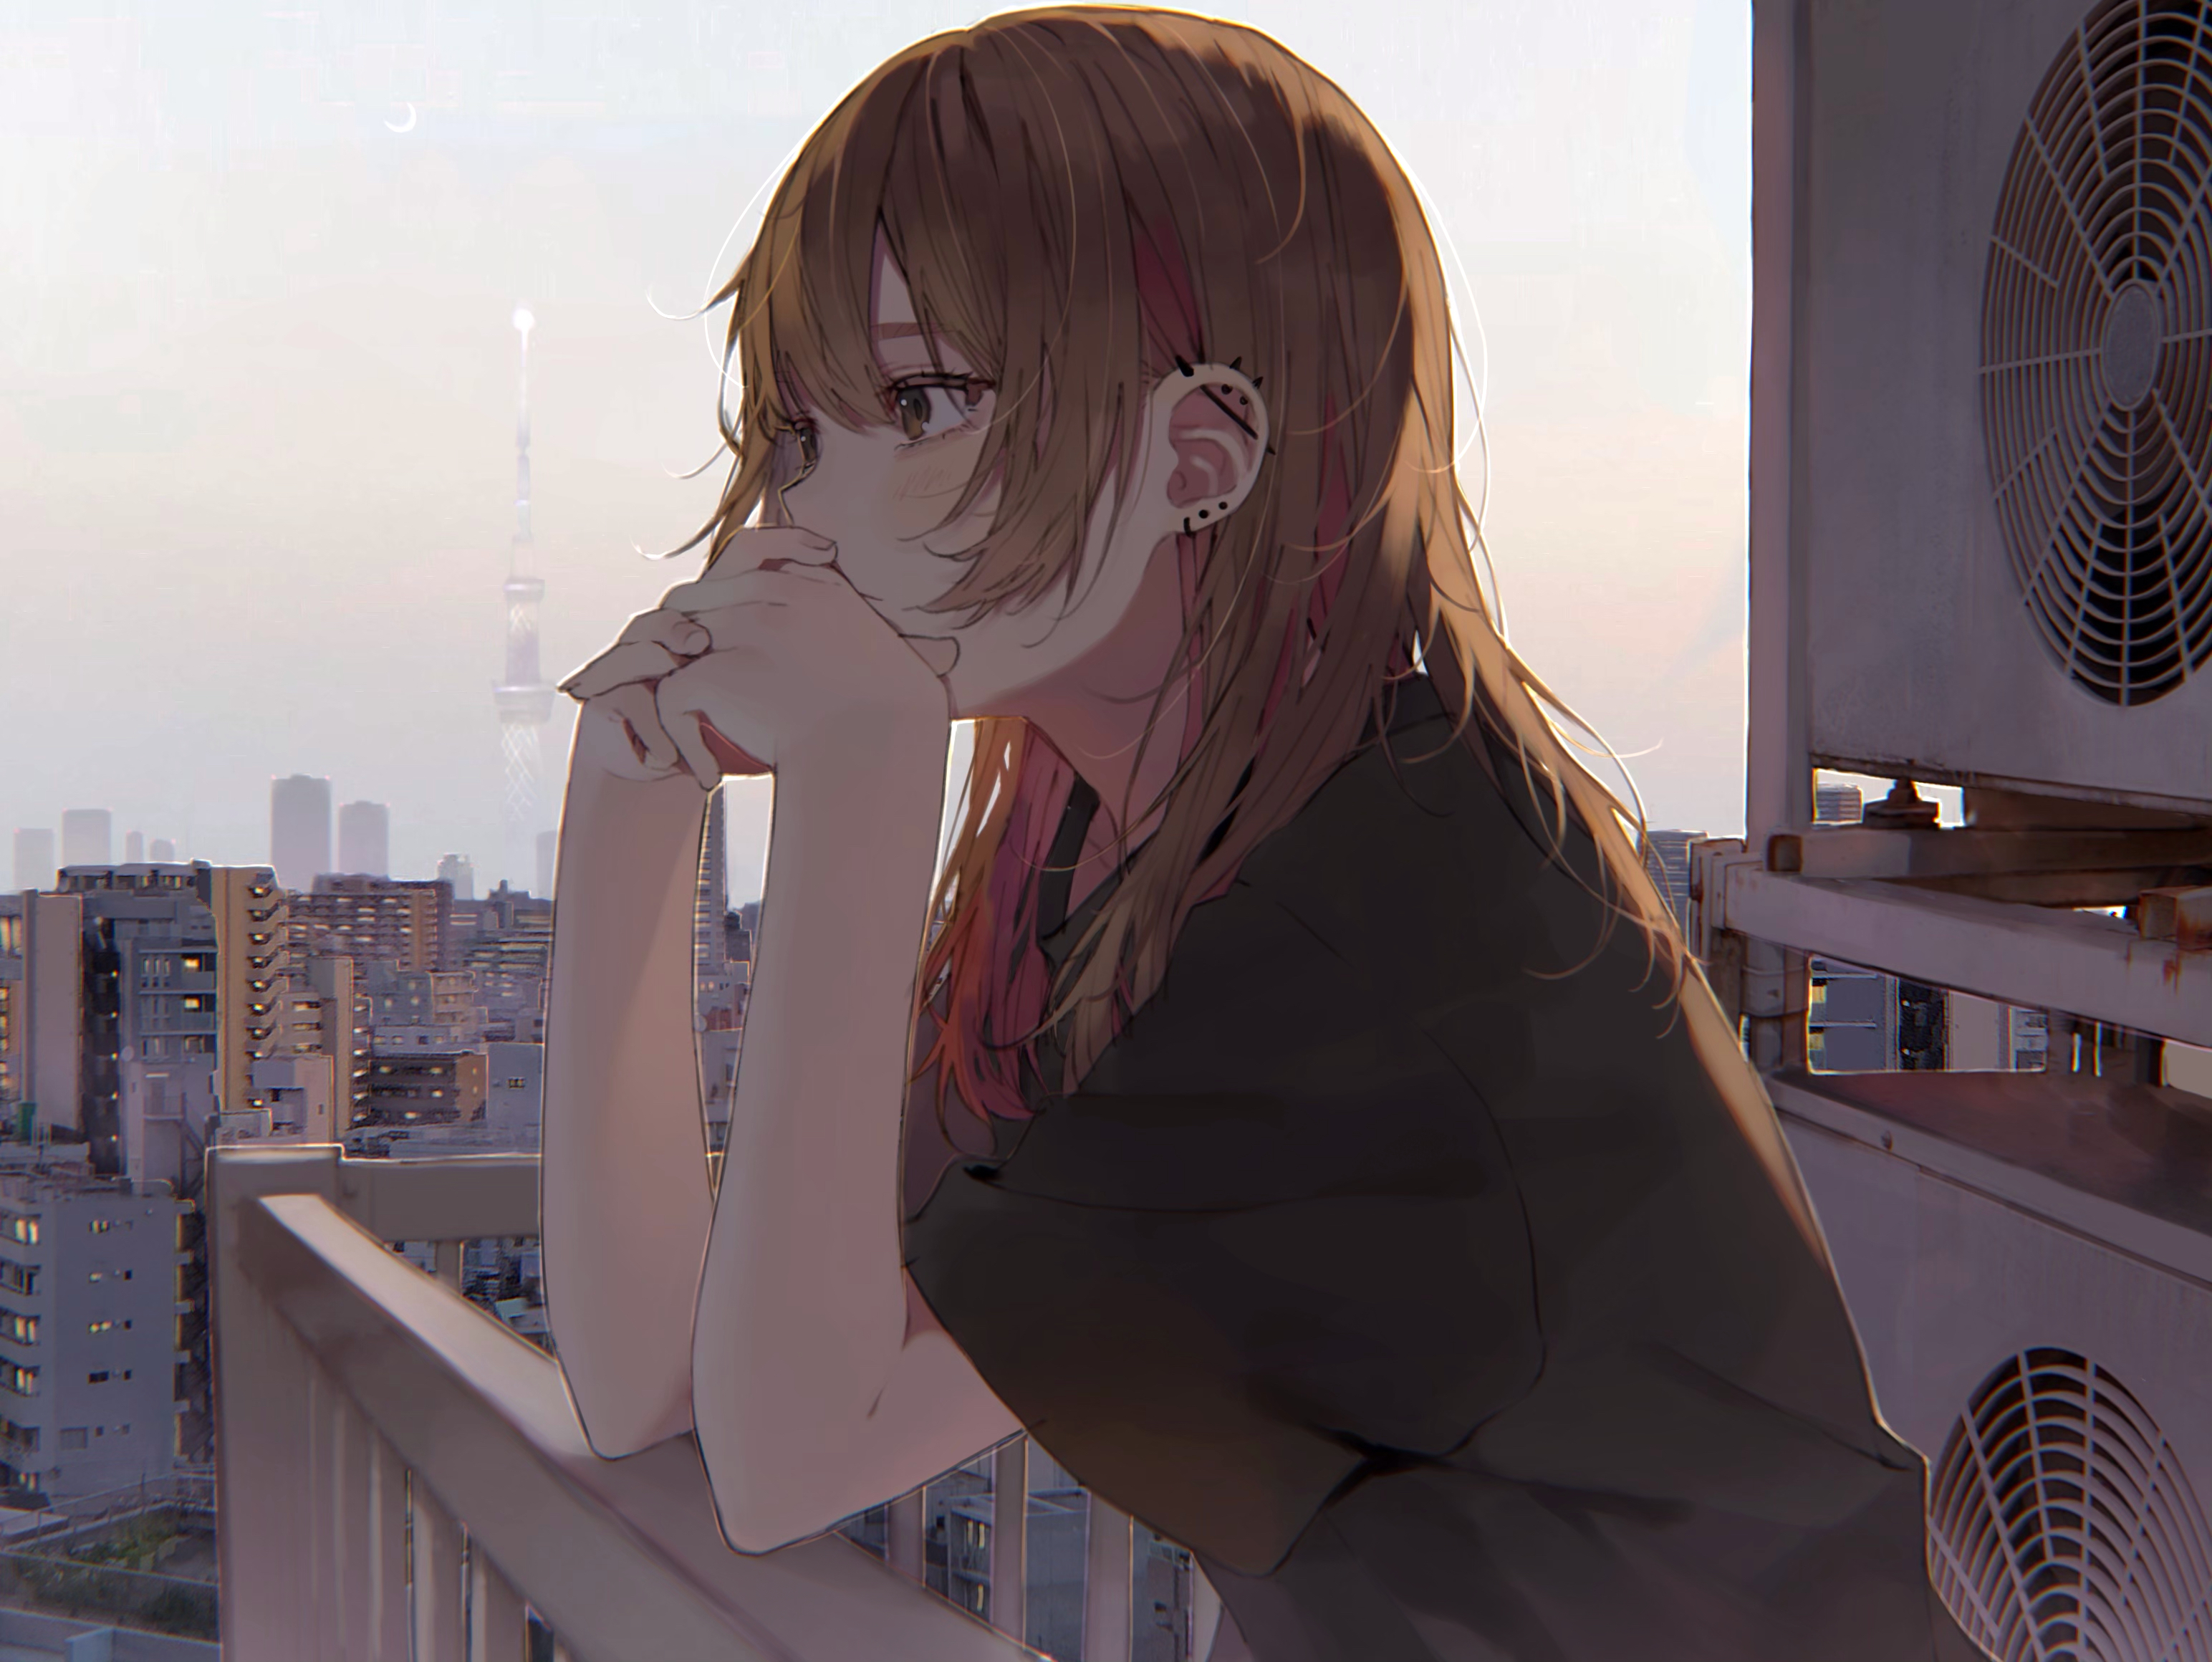 Anime 3088x2320 anime anime girls balcony air conditioning piercing original characters brunette multi-colored hair brown eyes side view hands crossed Daluto looking into the distance animeirl